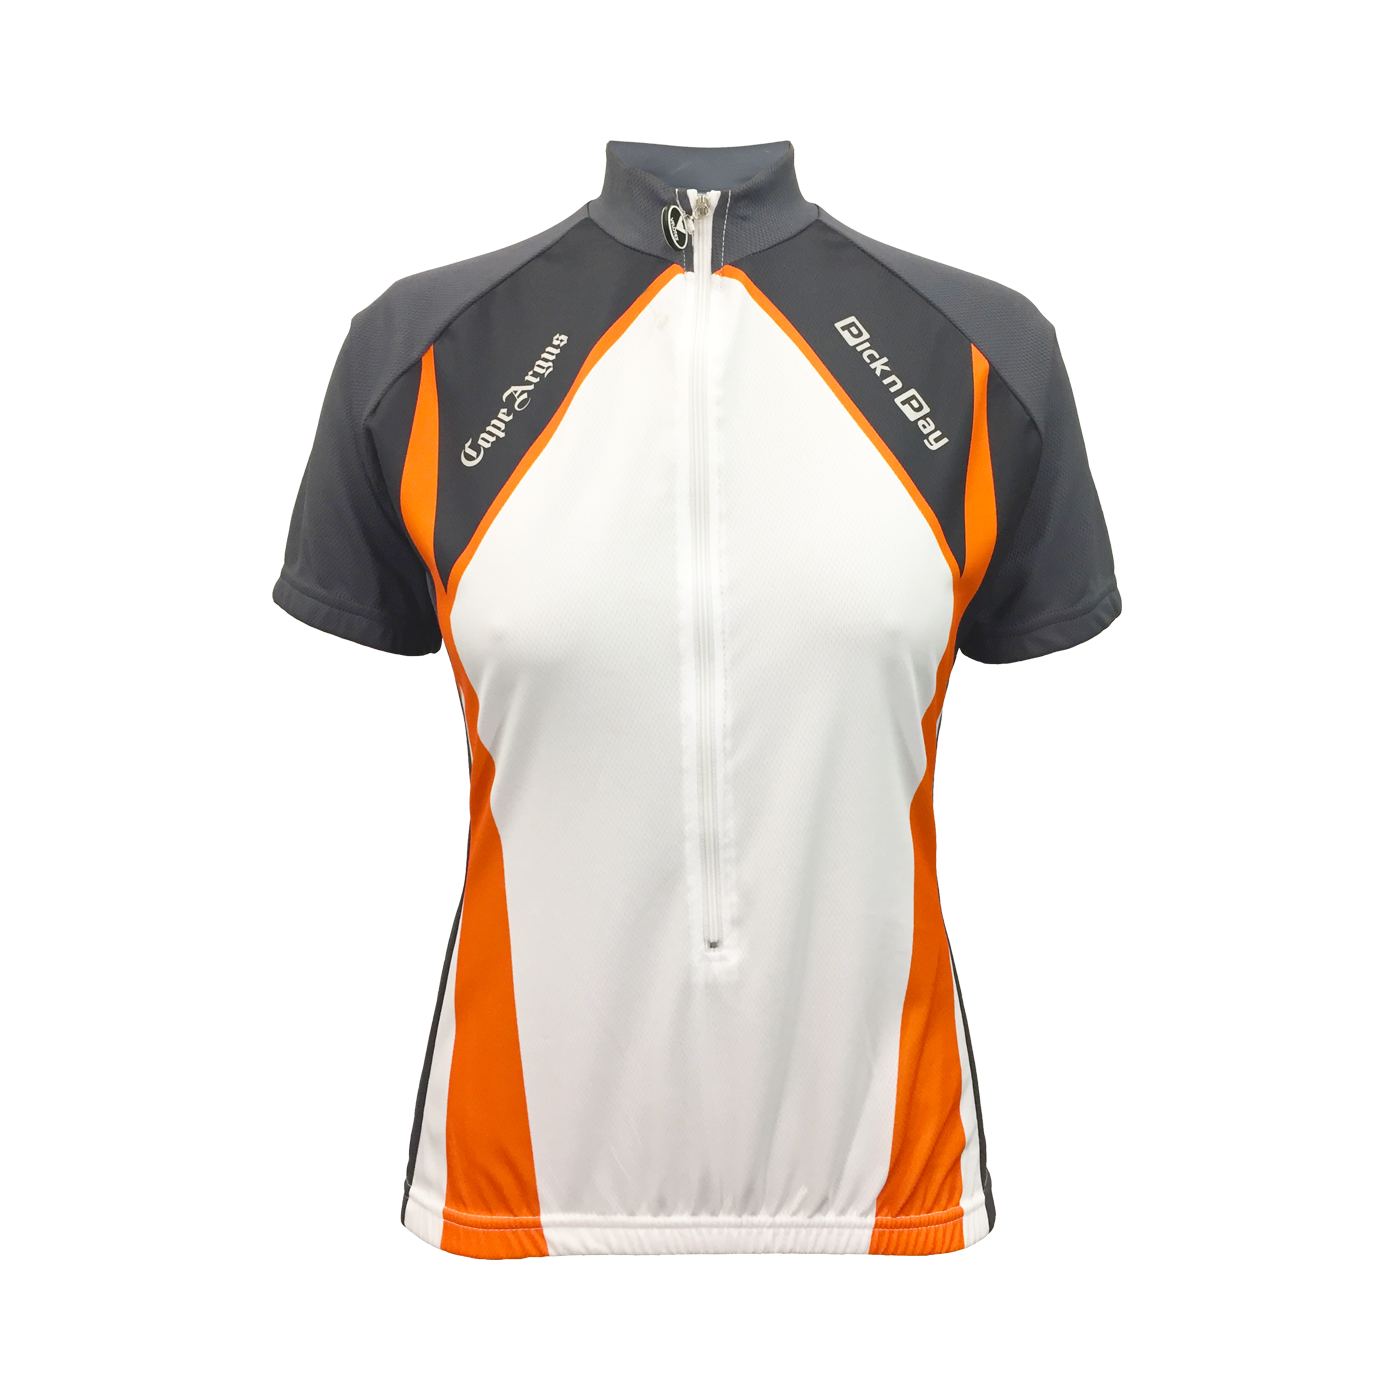 2011 Cycle Tour Cycling Jersey Ladies Vento